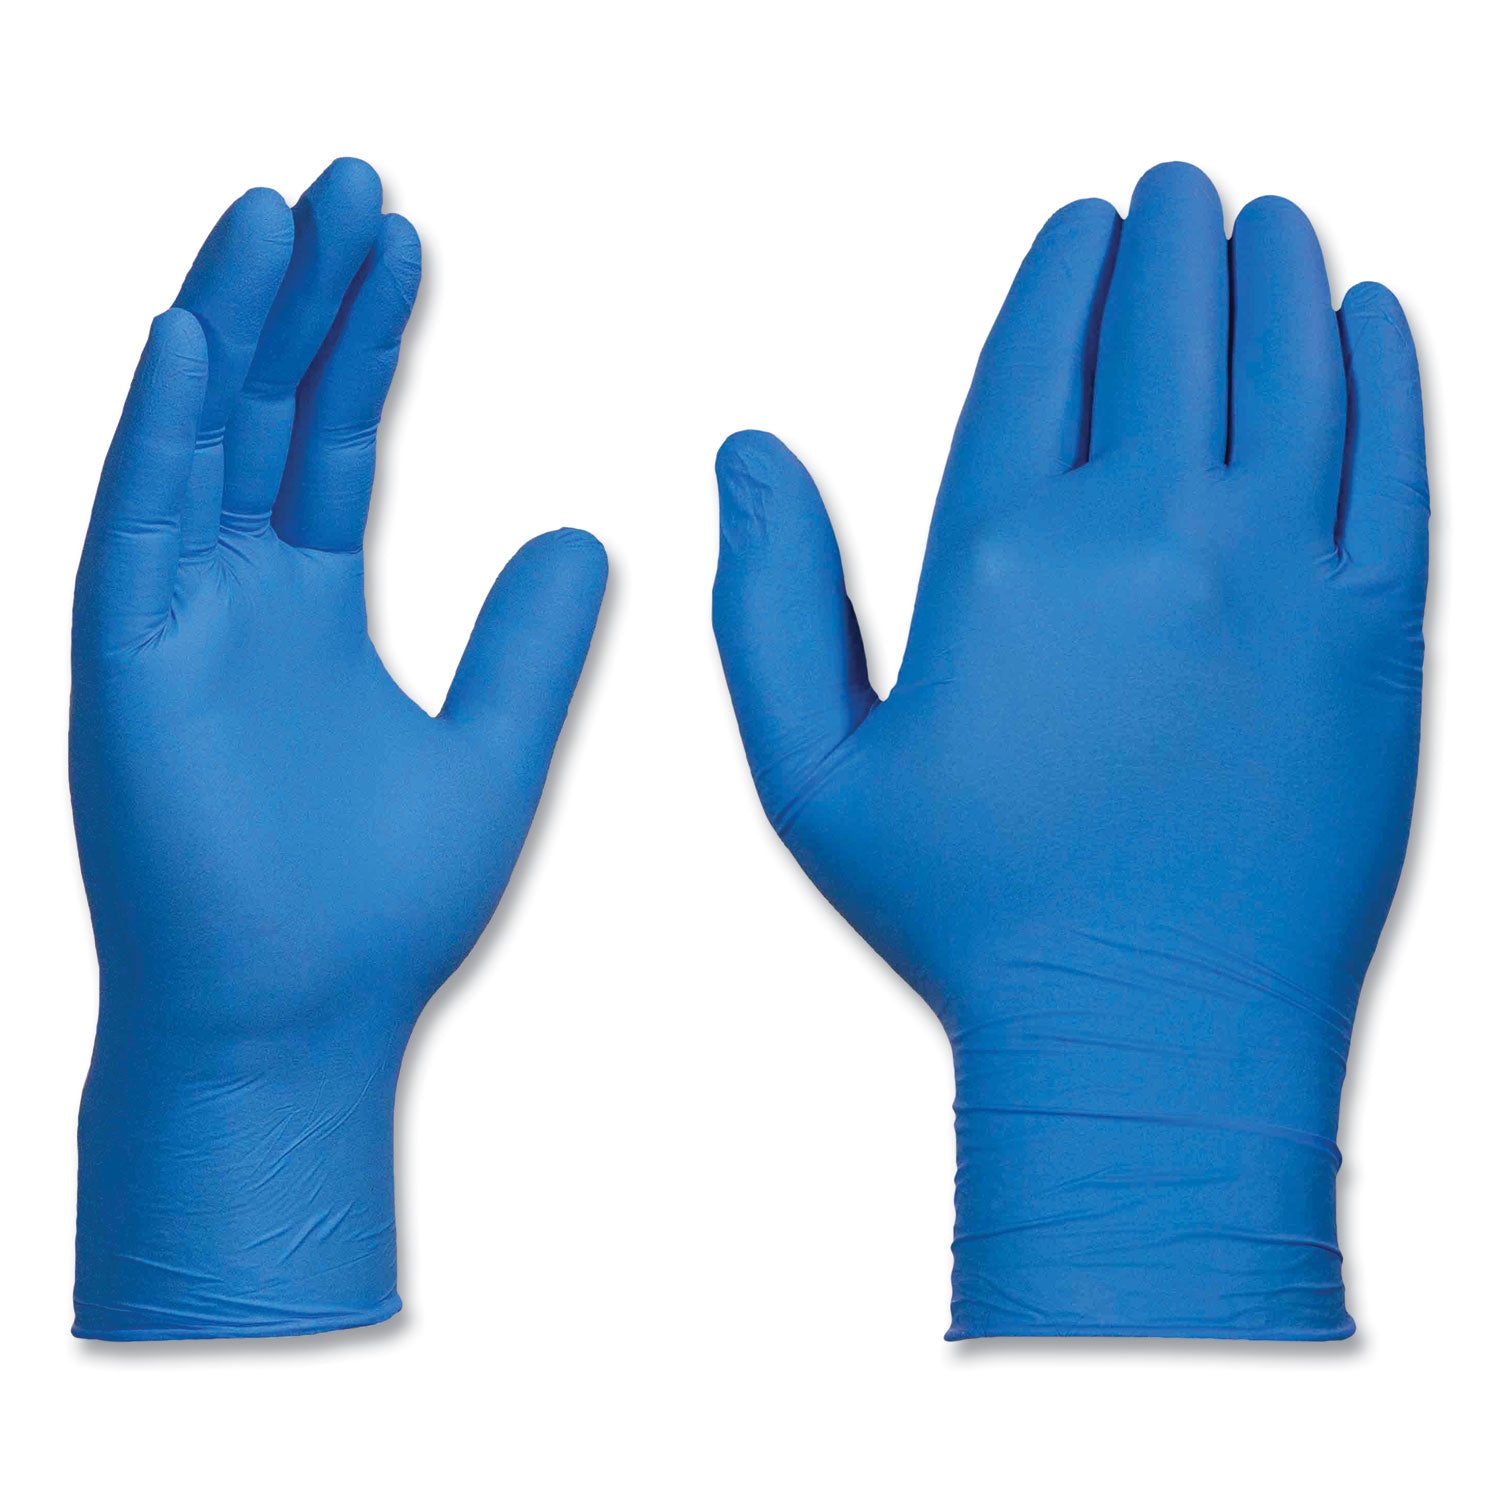 industrial-nitrile-gloves-powder-free-3-mil-large-blue-100-box-10-boxes-carton_axcx346100 - 2